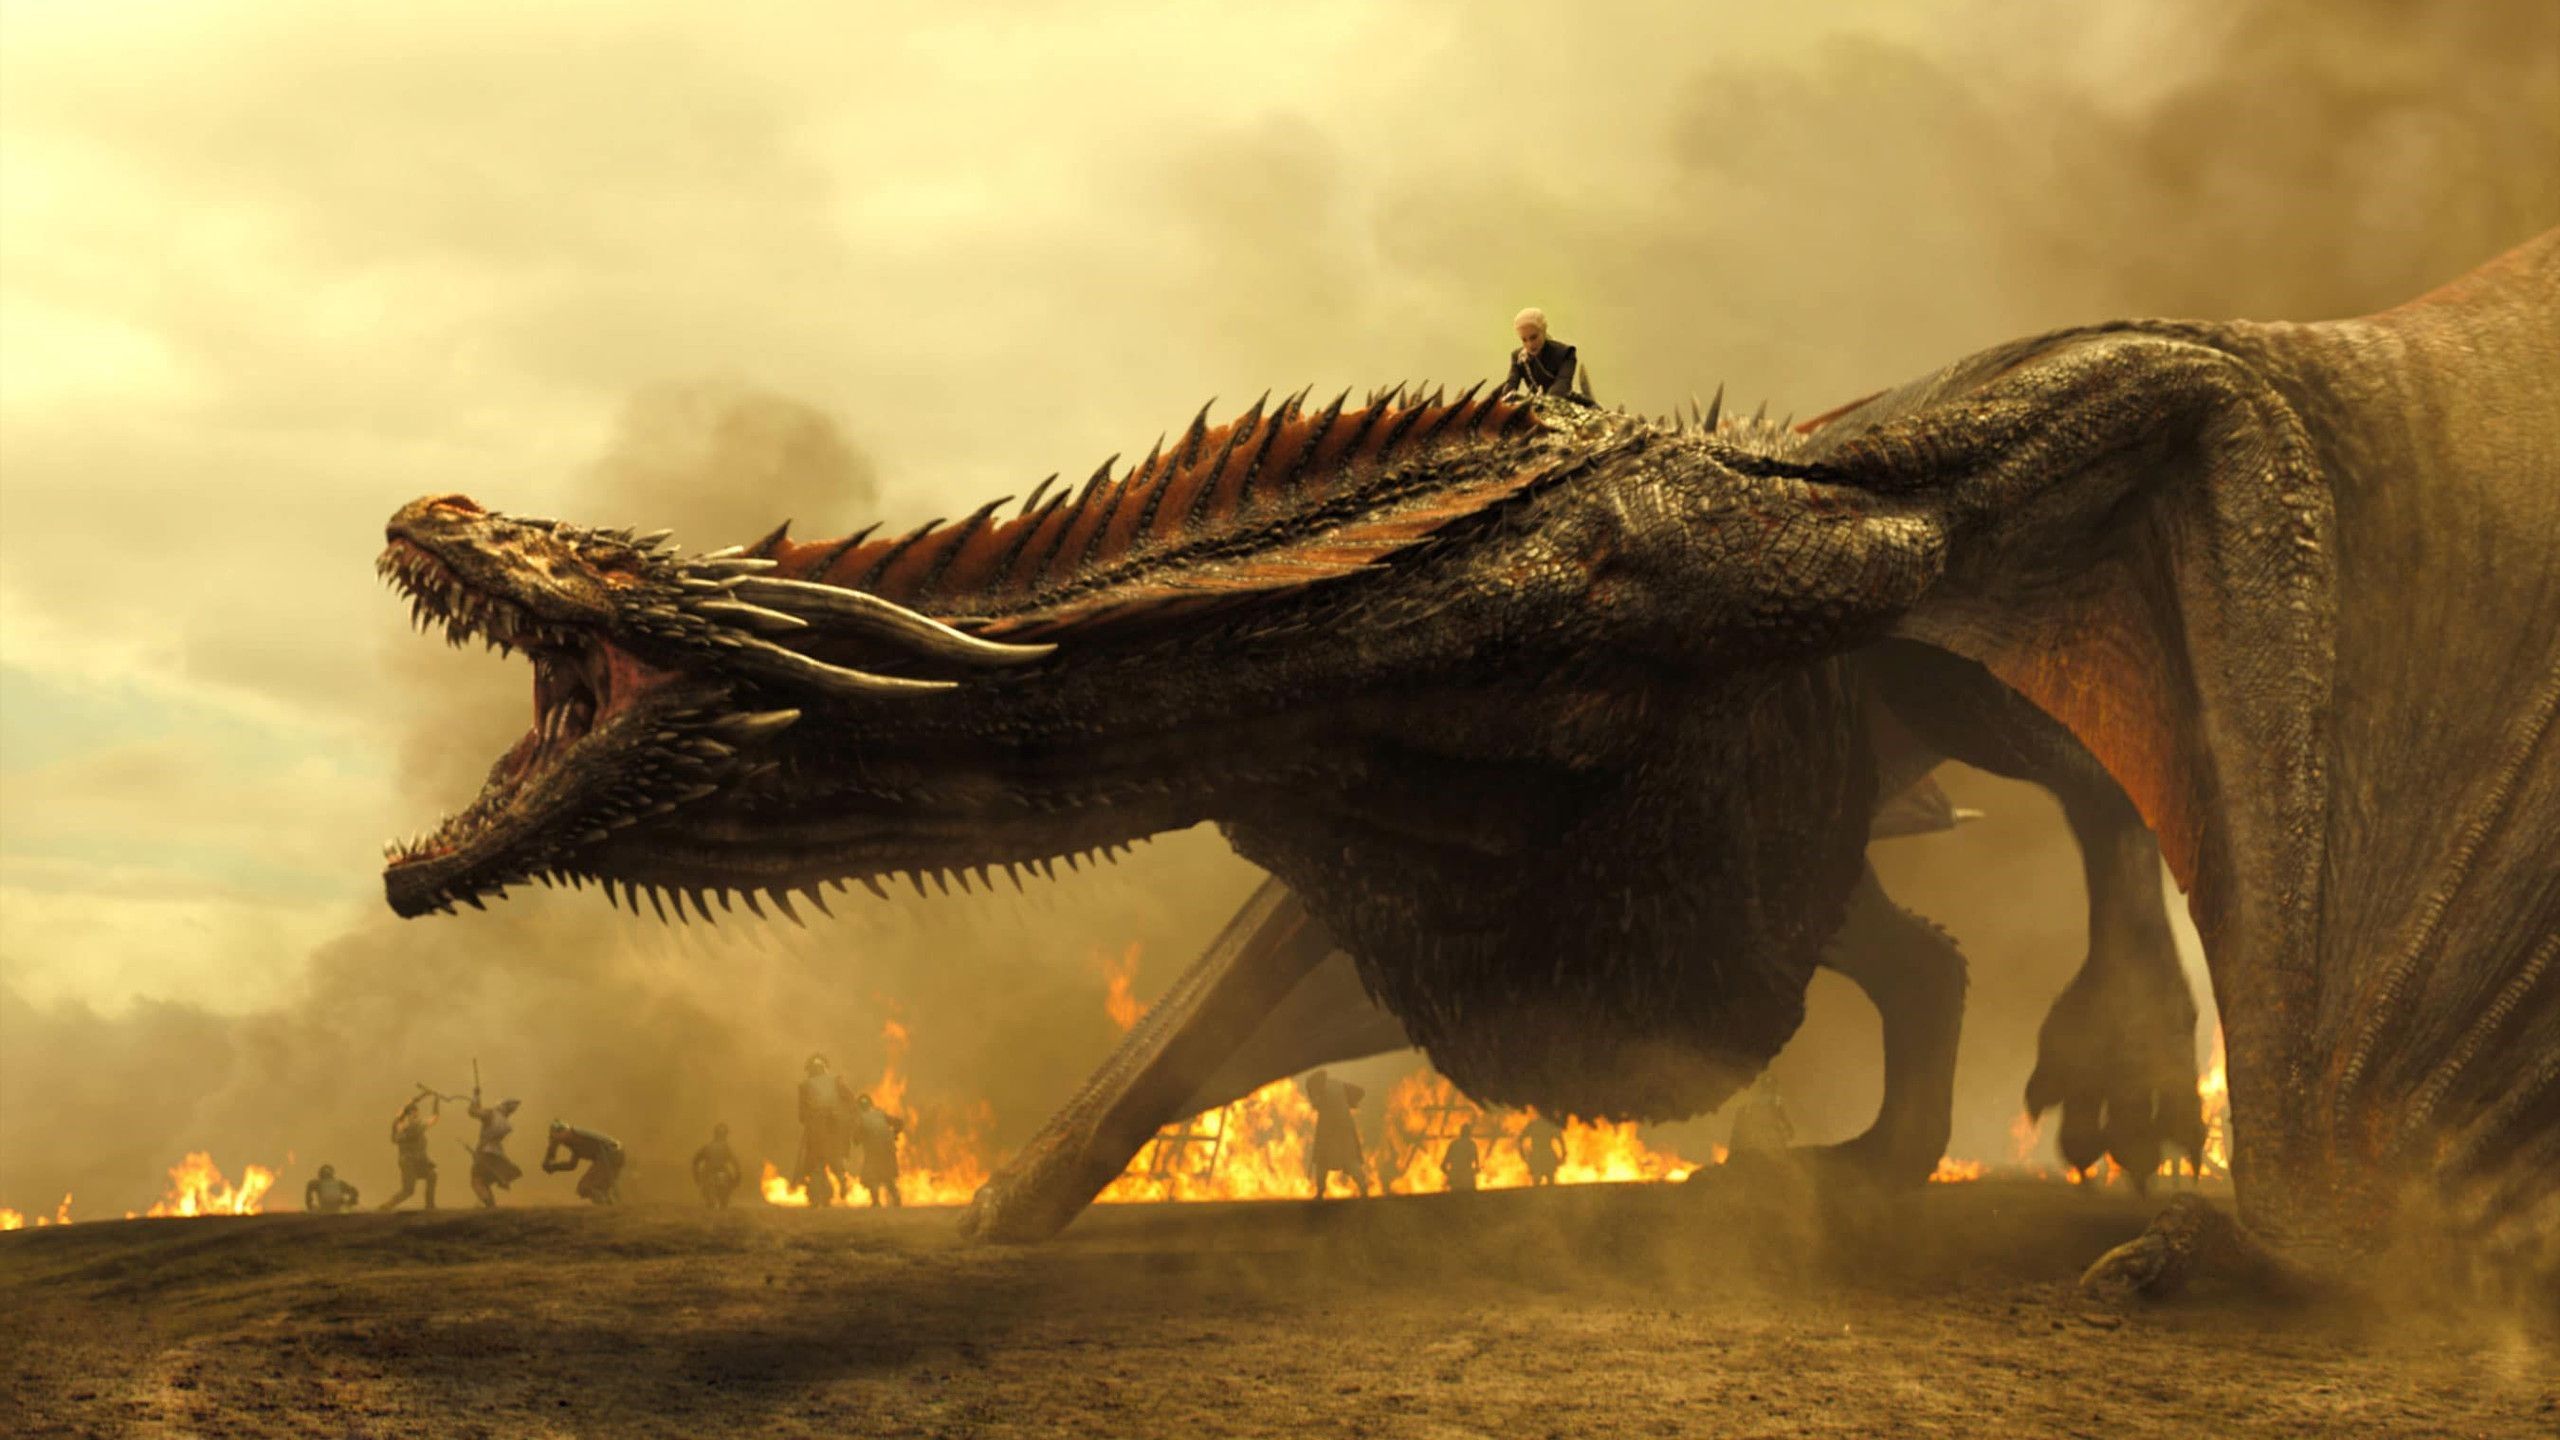 Game of Thrones HD Background Wallpaper Download Resolution